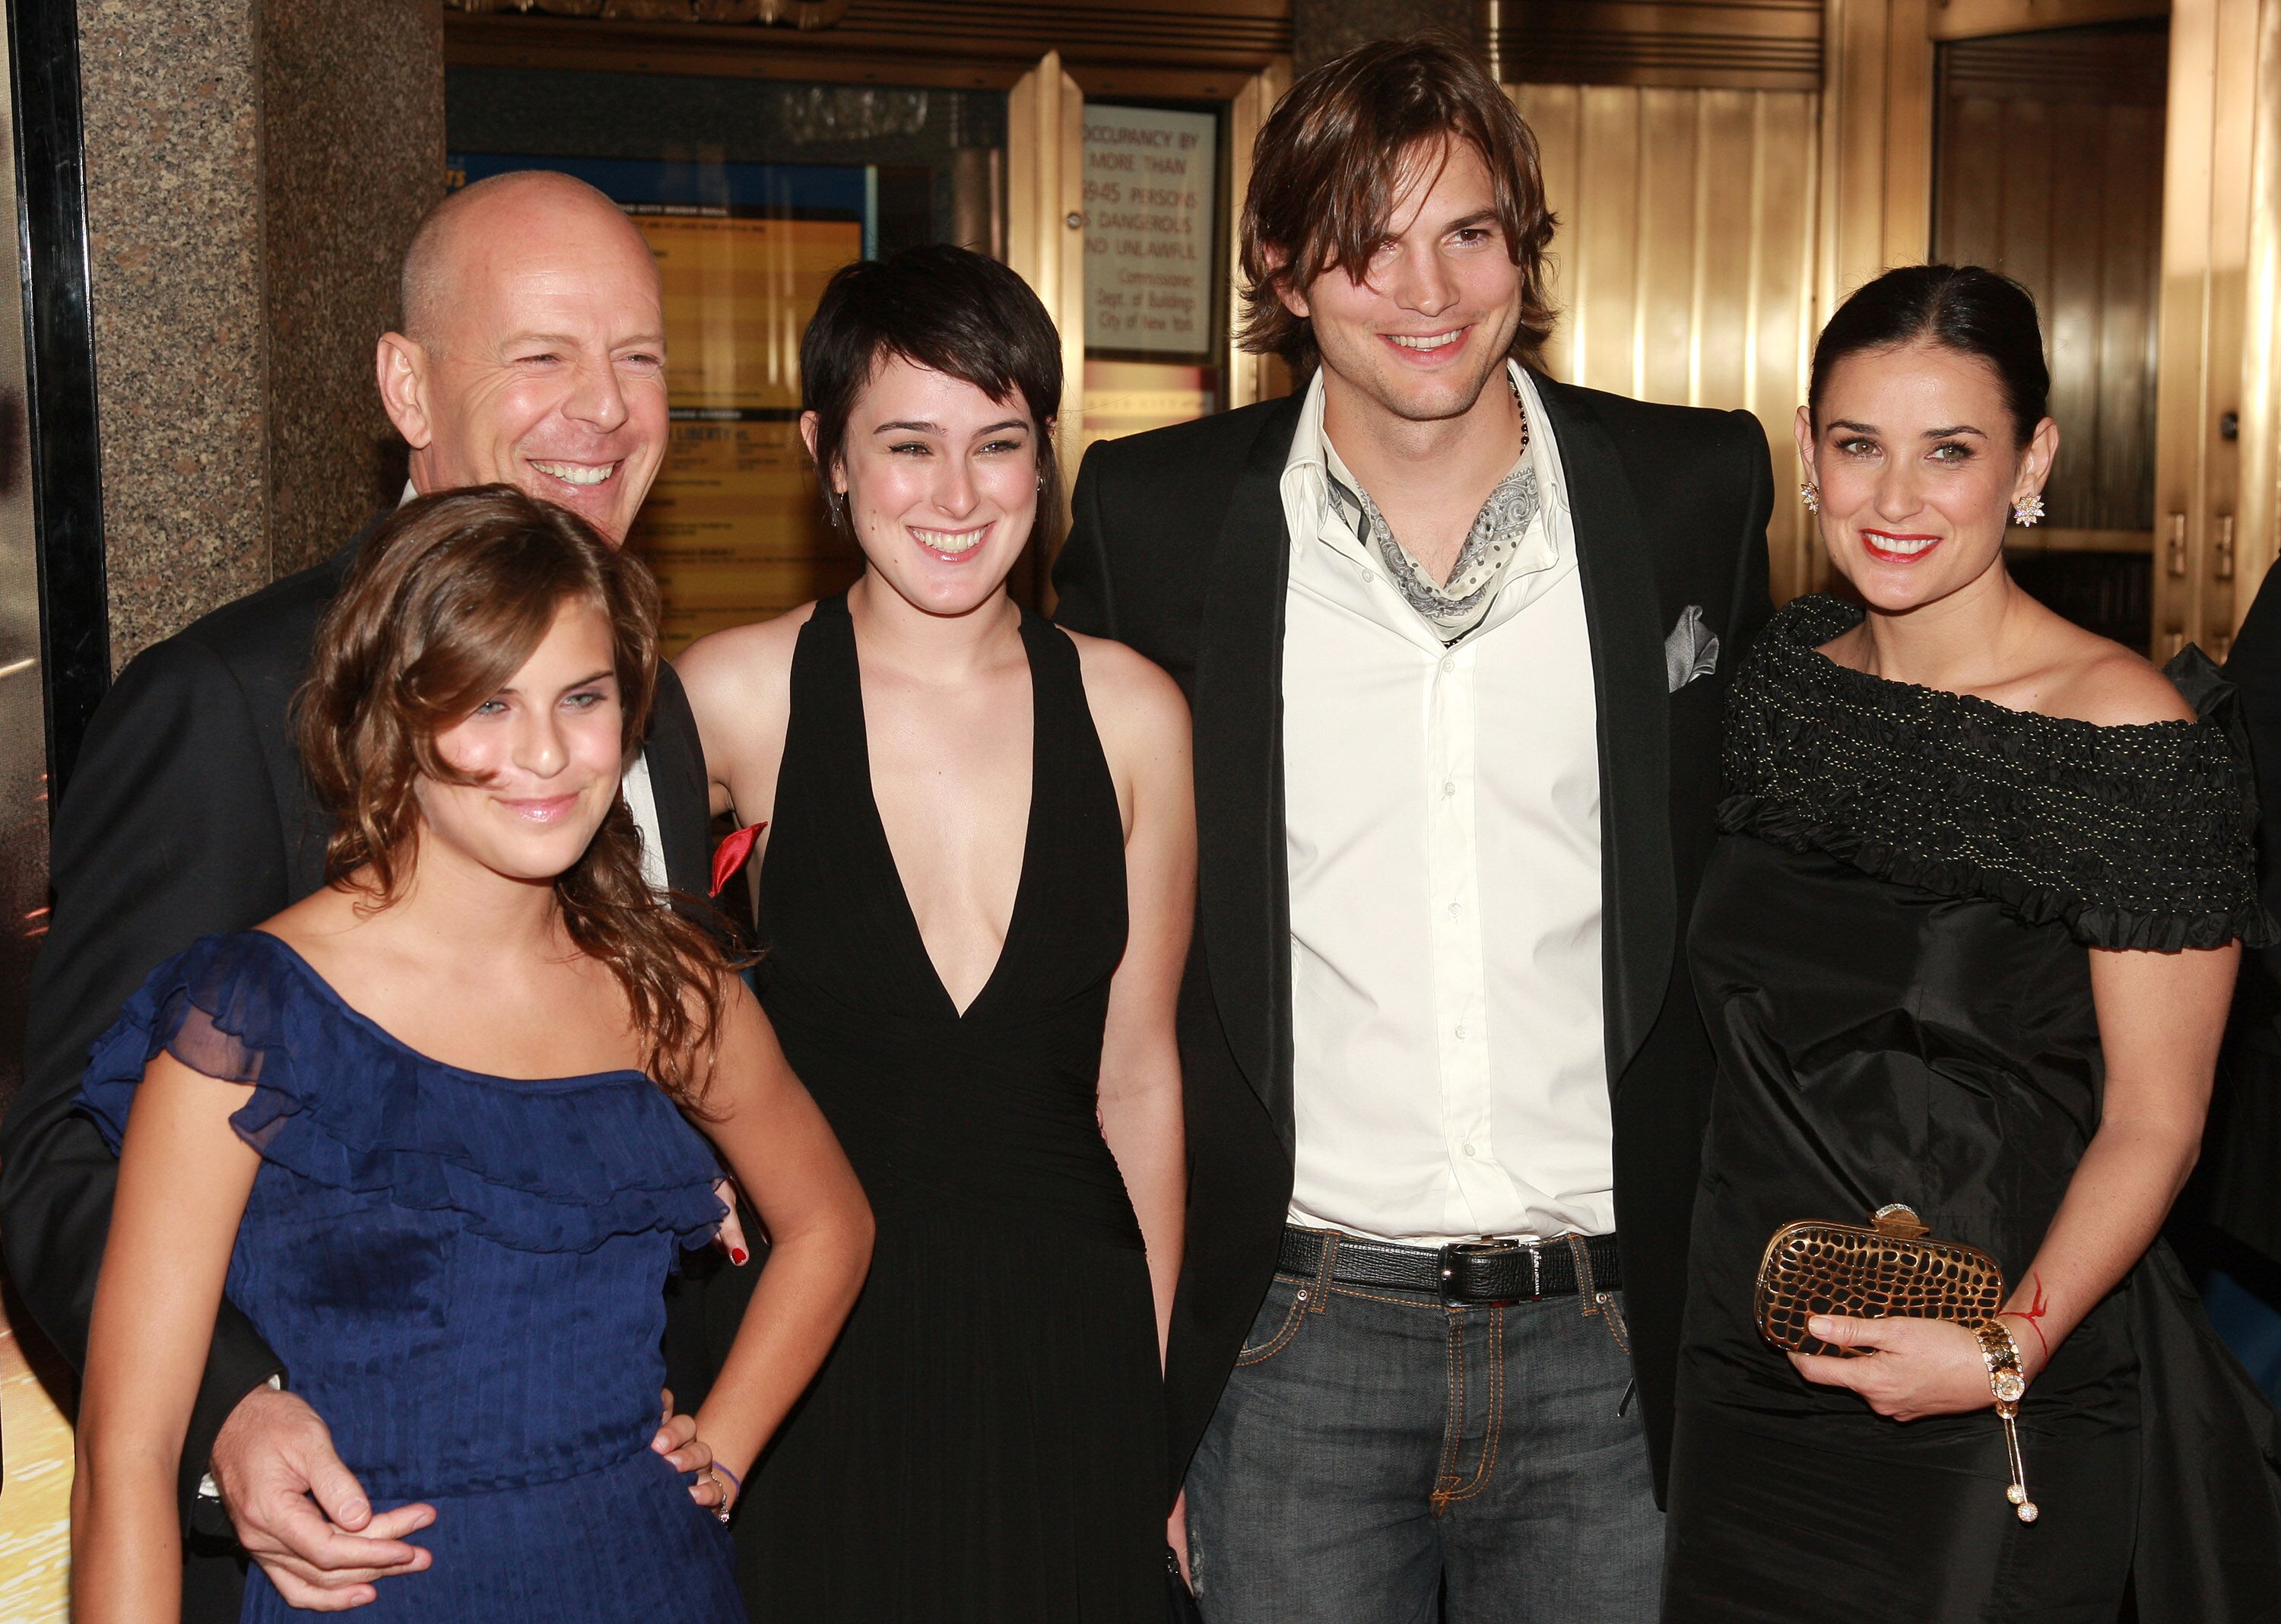 Ashton Kutcher, Demi Moore, Bruce Willis, Rumer and Tallulah Willis at the premiere of "Live Free Or Die Hard" in 2007, in New York | Source: Getty Images